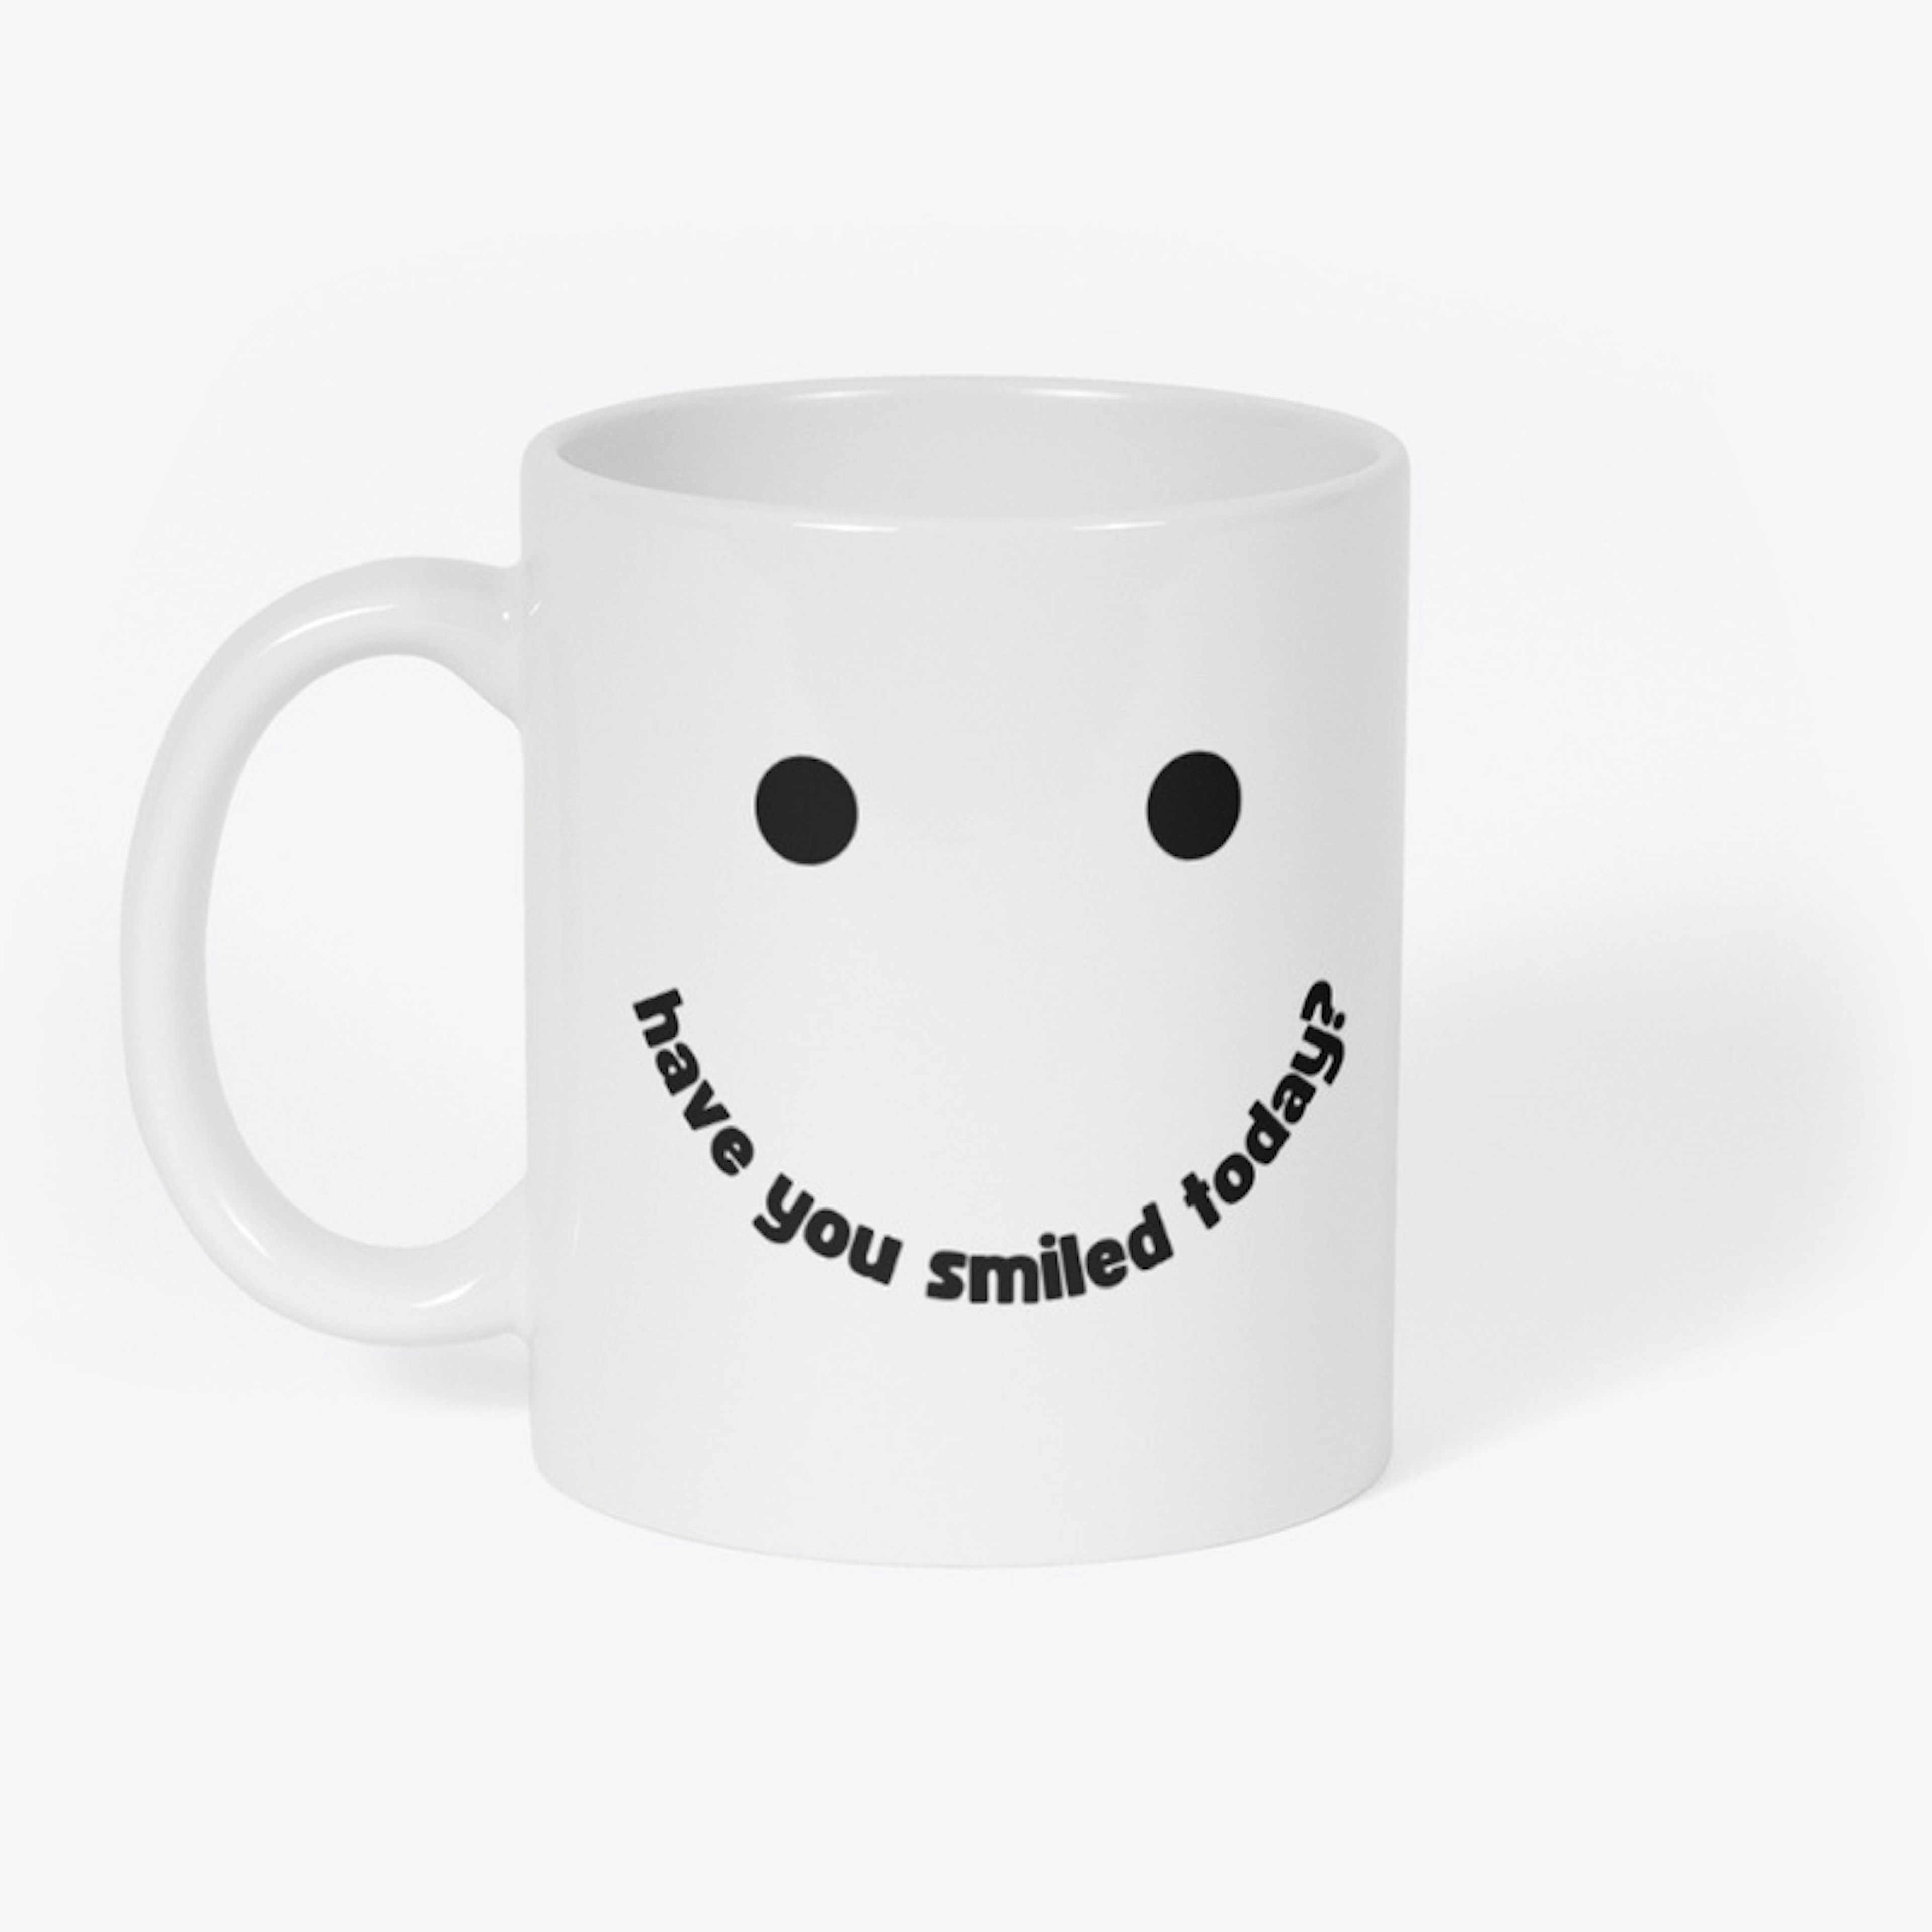 Have You Smiled Today?